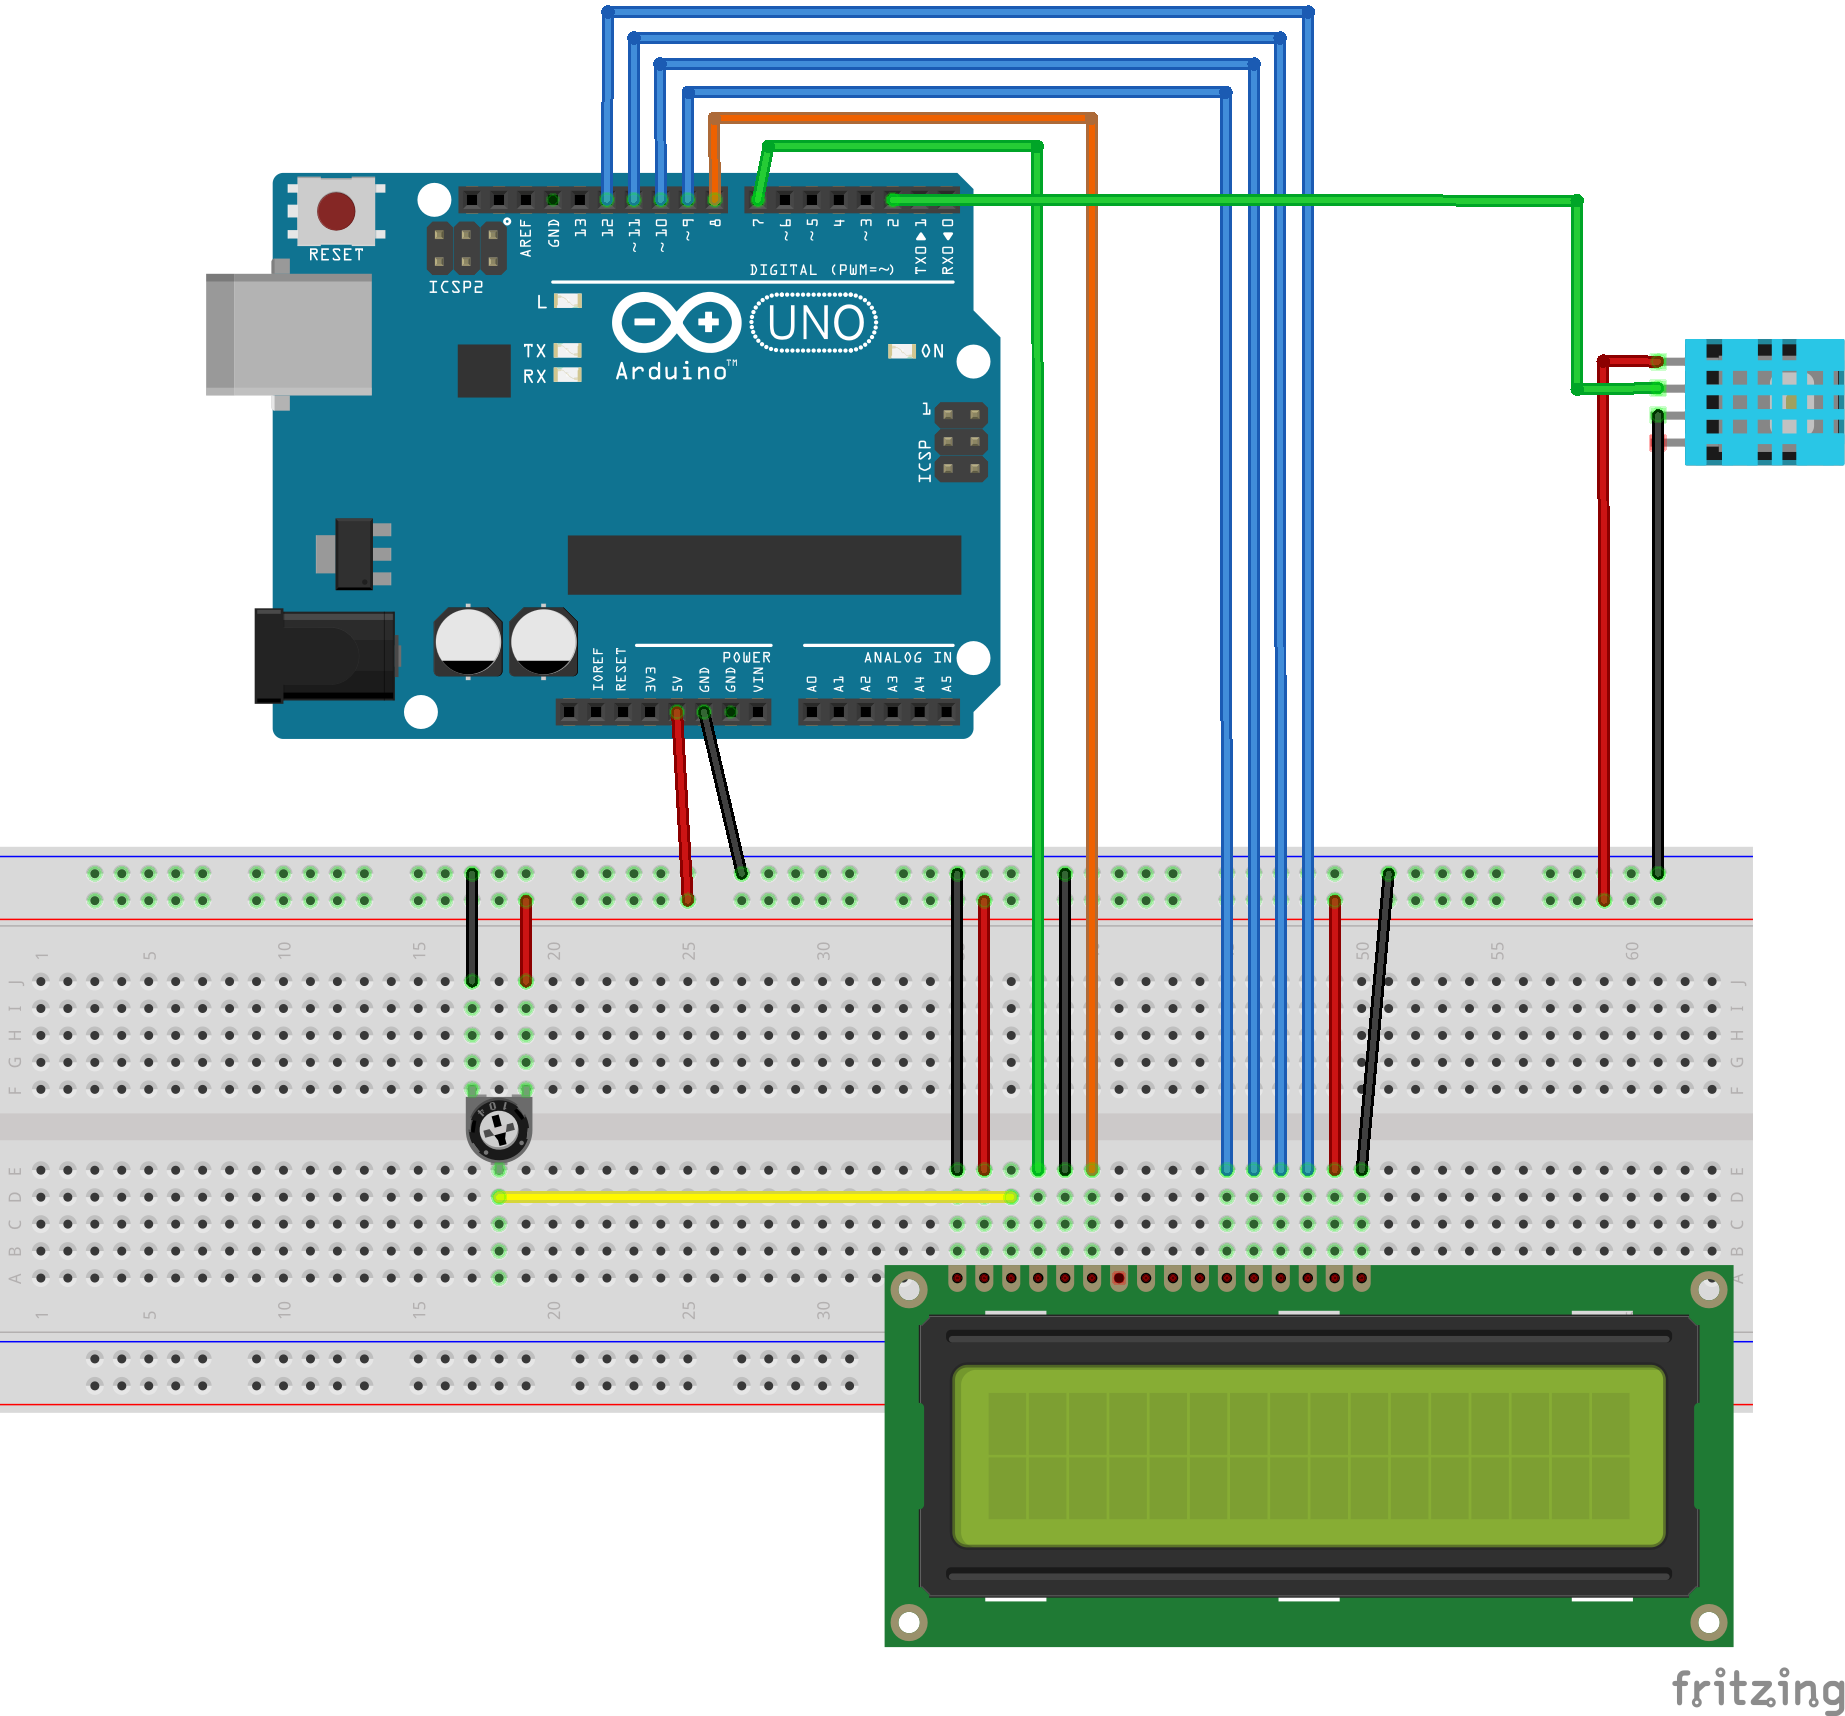 Tutorial: Displaying Aggregated Data on an LCD – SENSING THE CITY